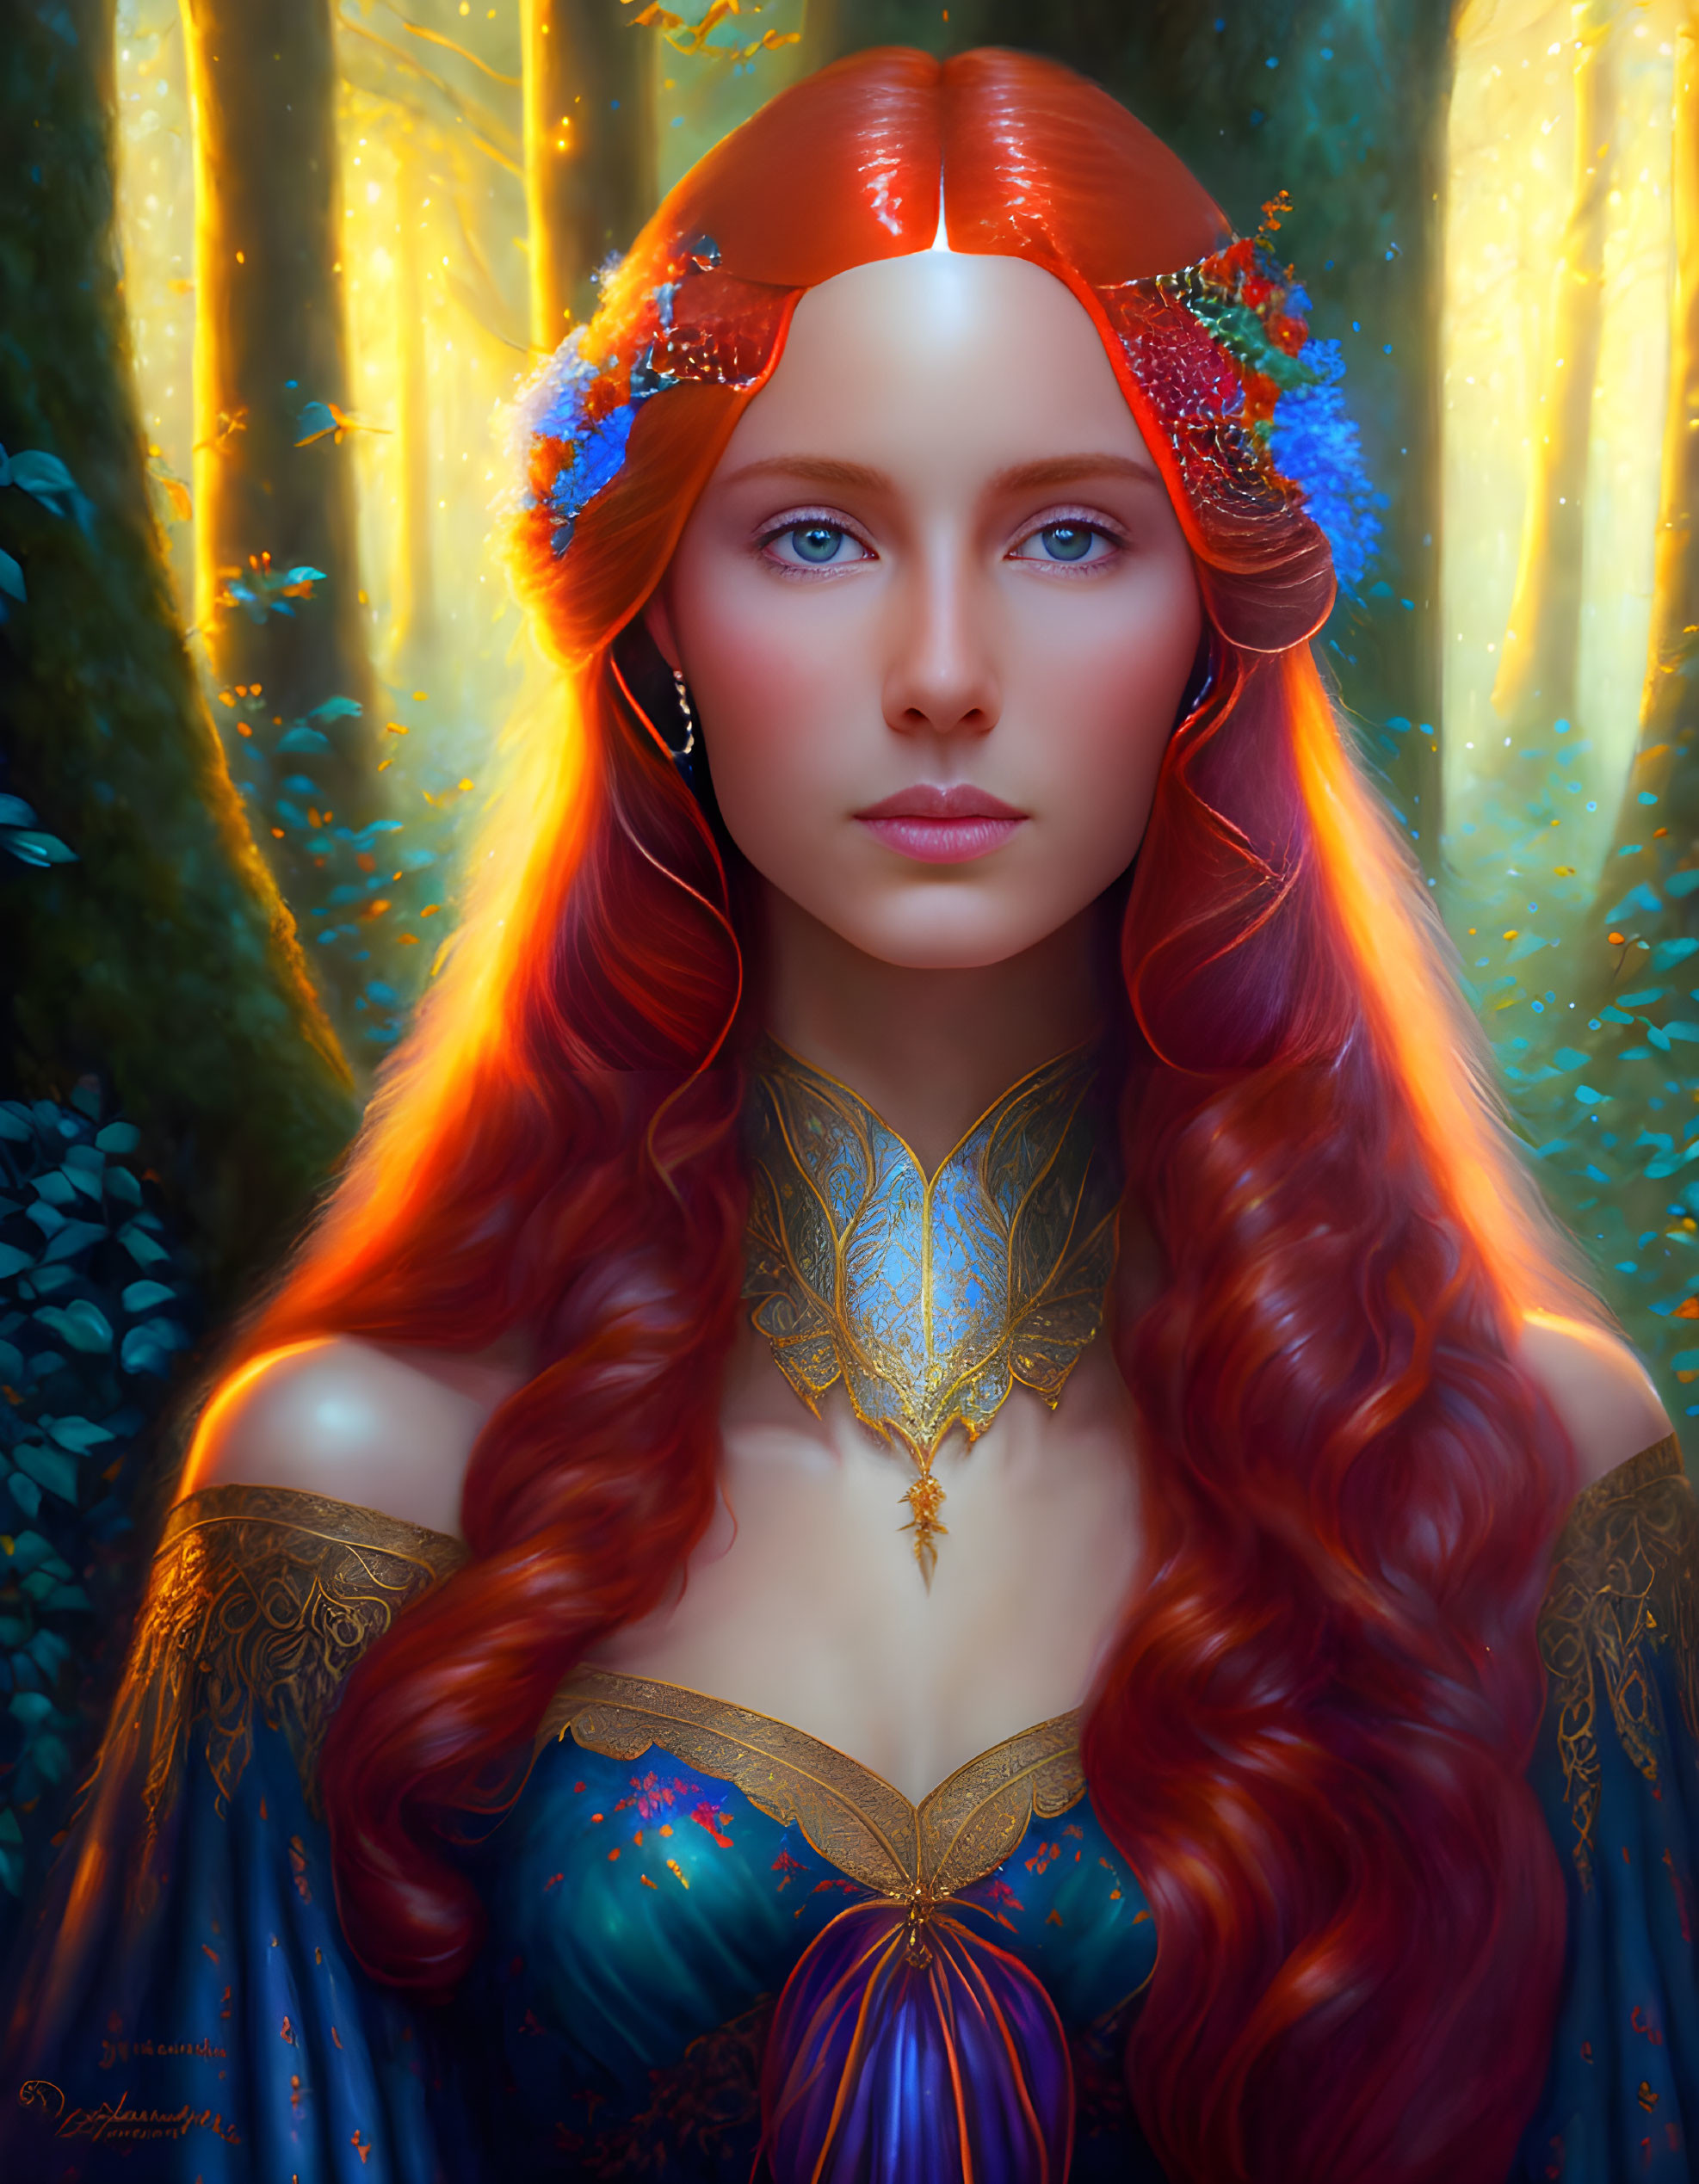 Digital artwork: Mystical woman with red hair and blue eyes in ethereal attire in enchanted forest